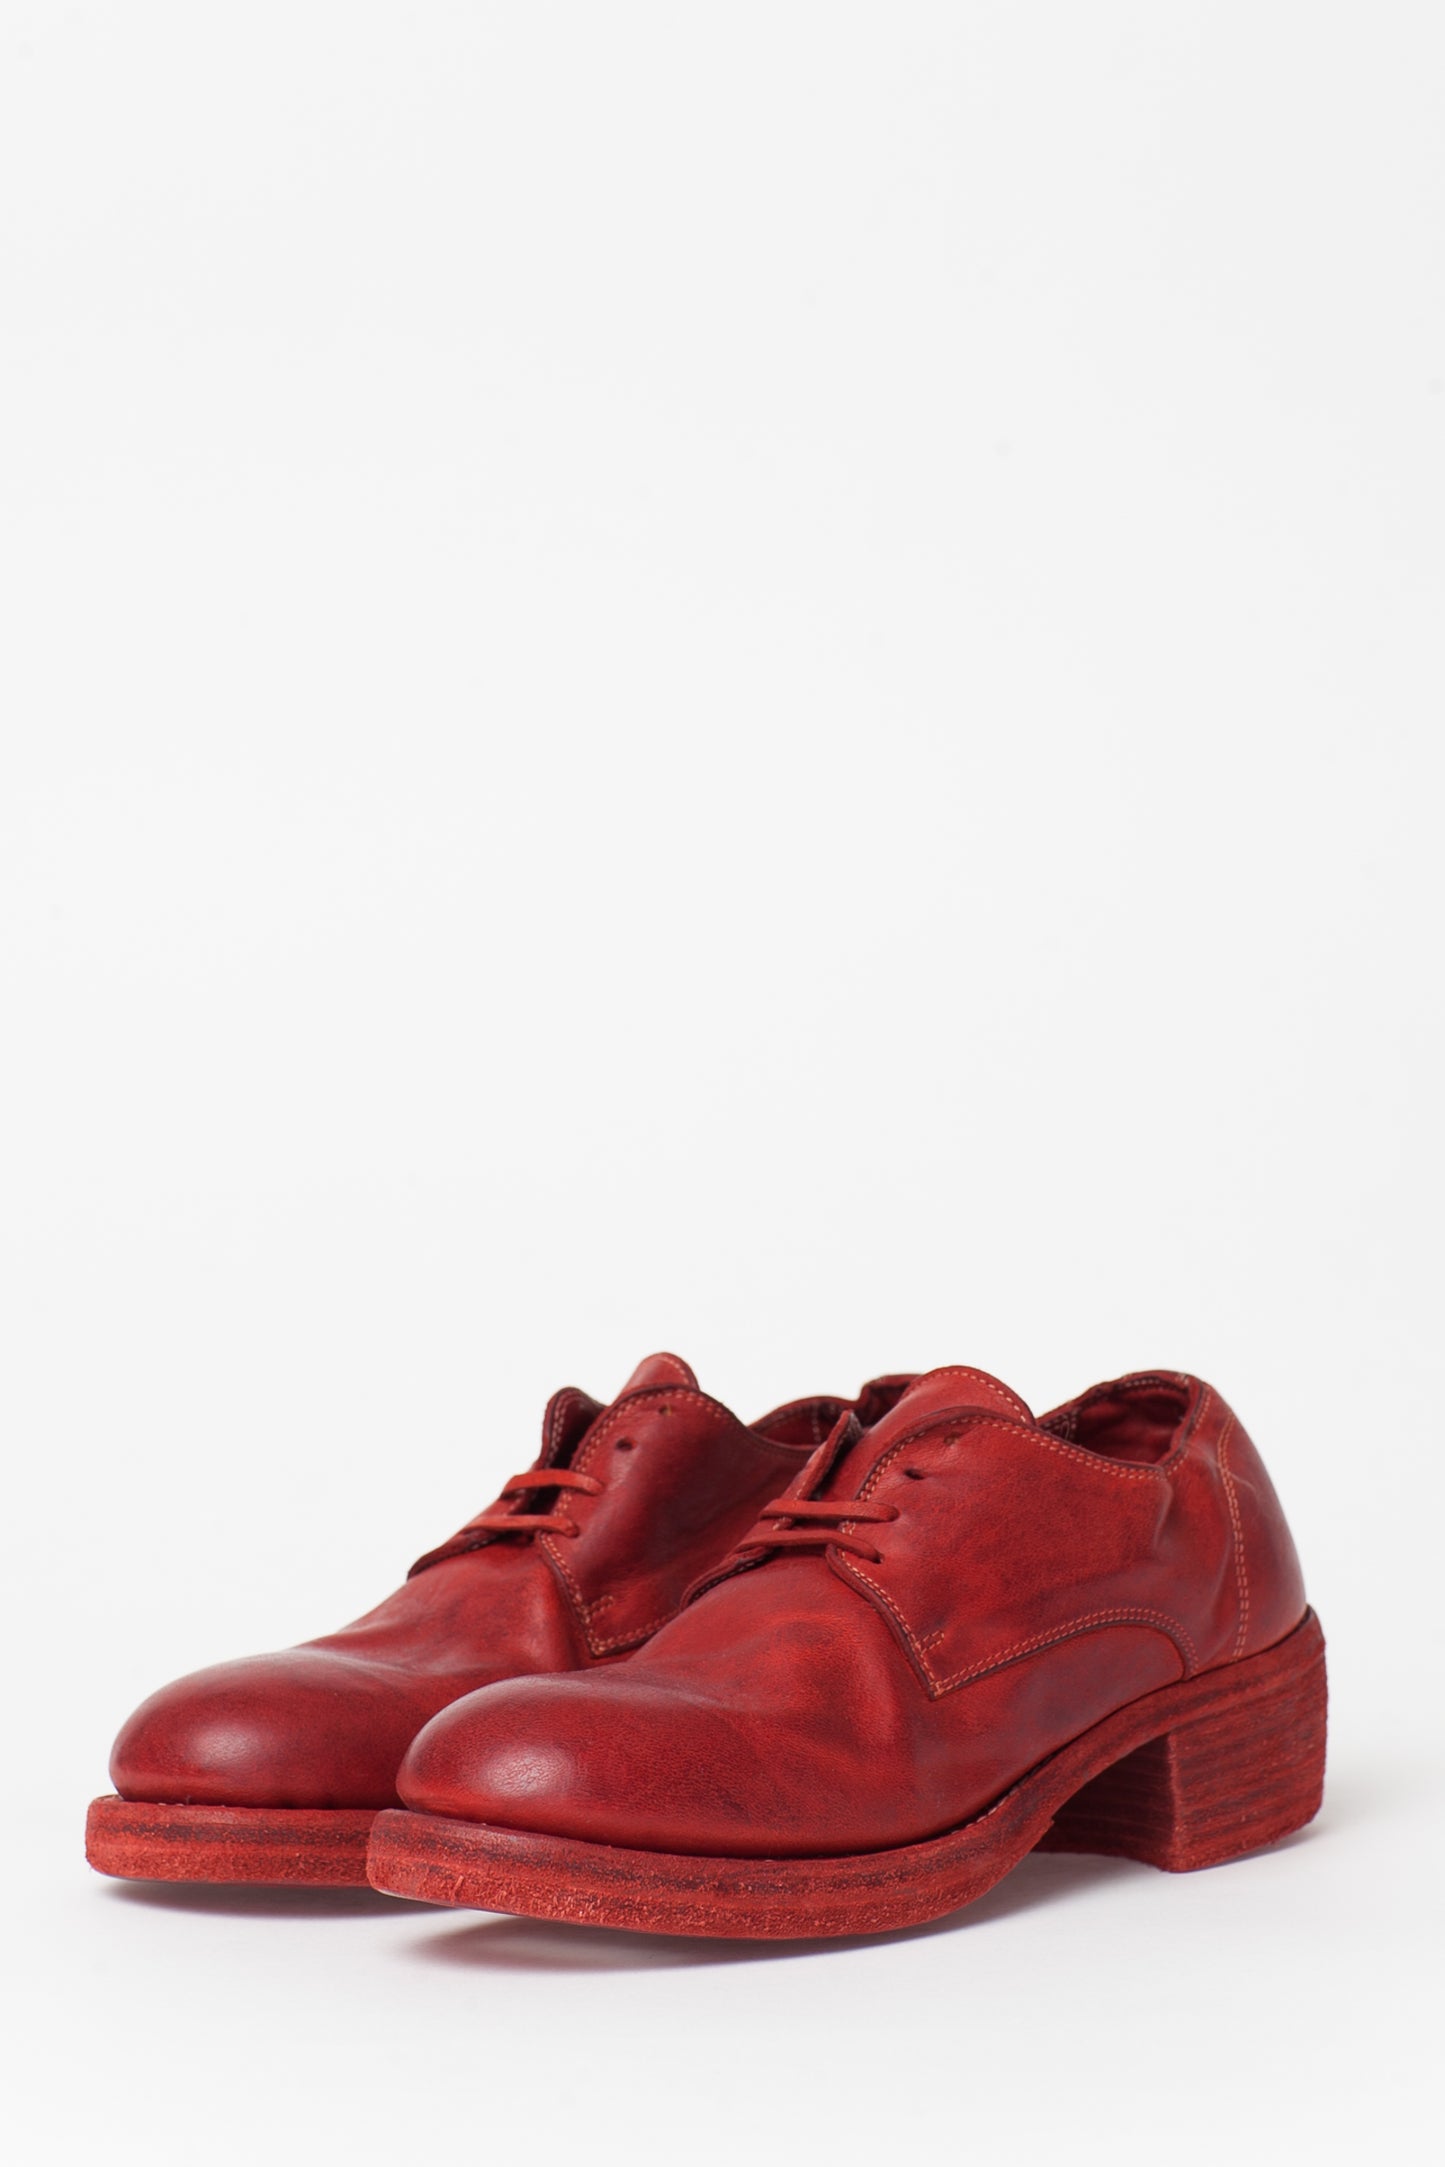 Guidi Red Leather 792z Derby